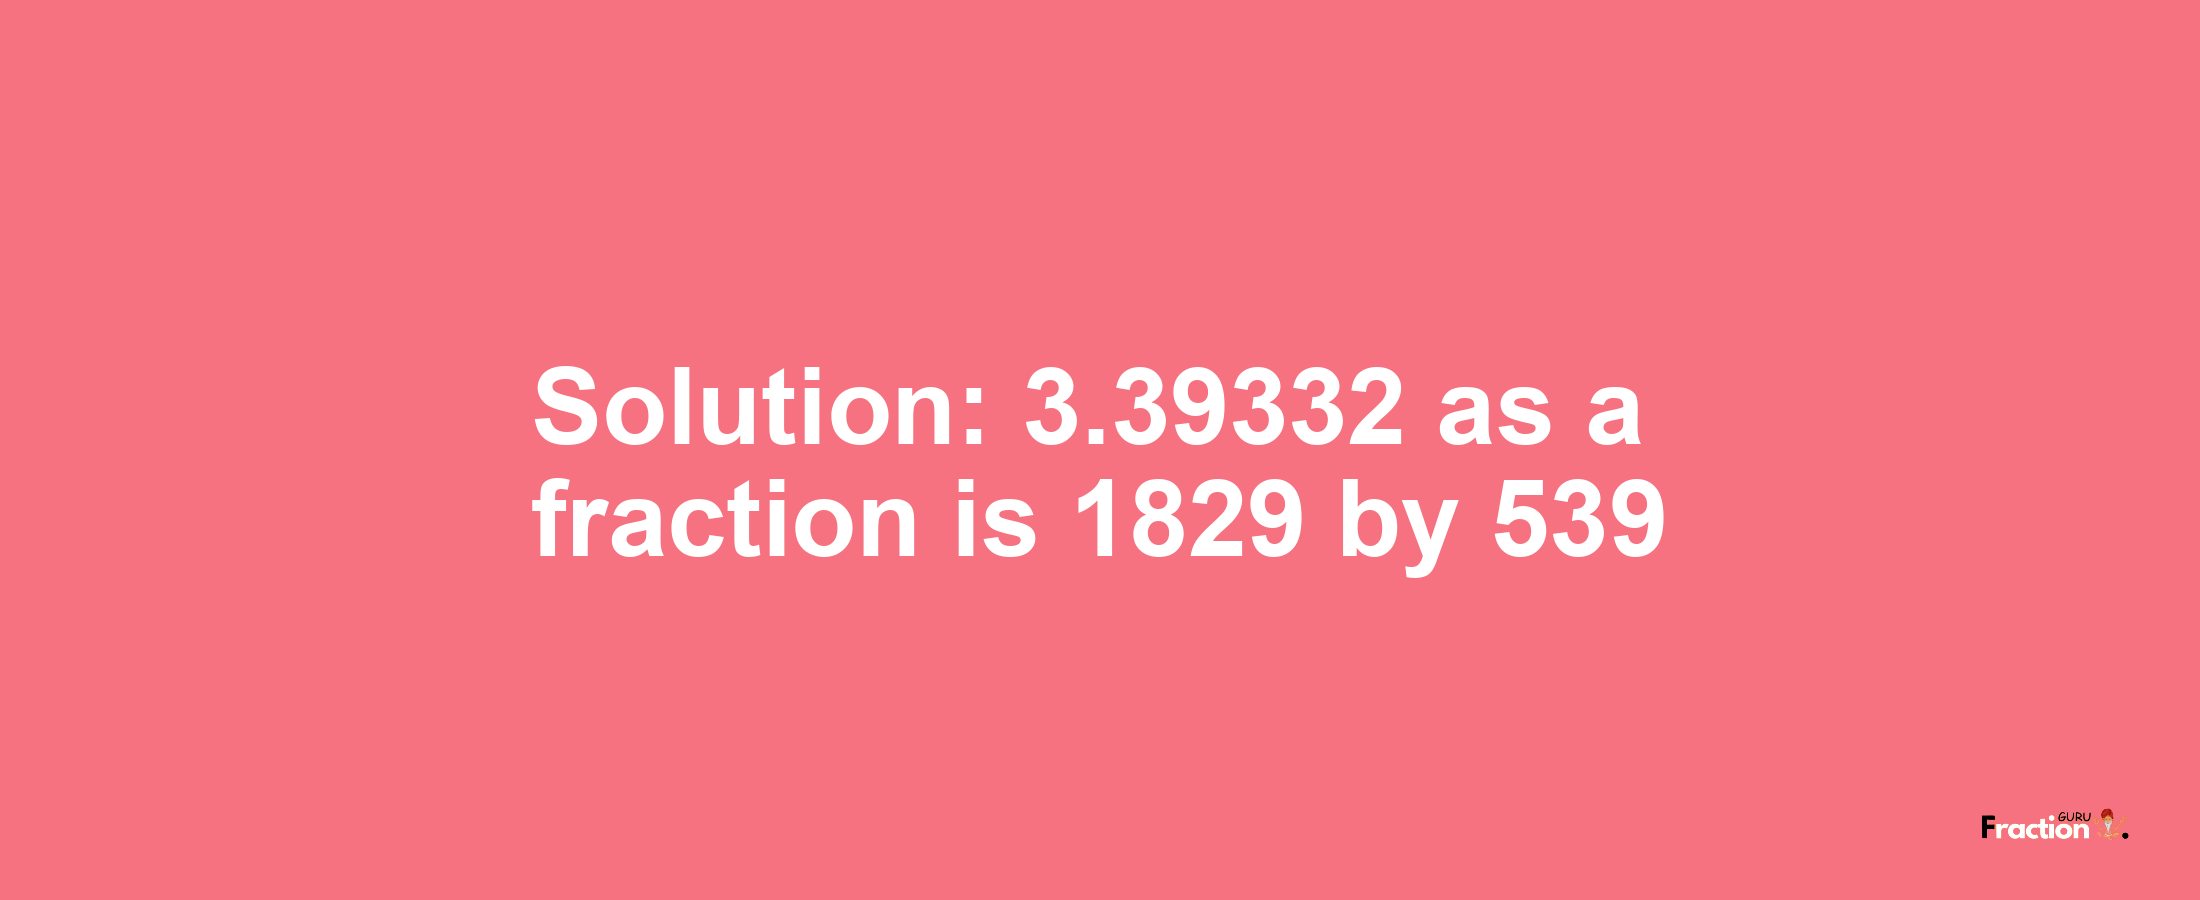 Solution:3.39332 as a fraction is 1829/539